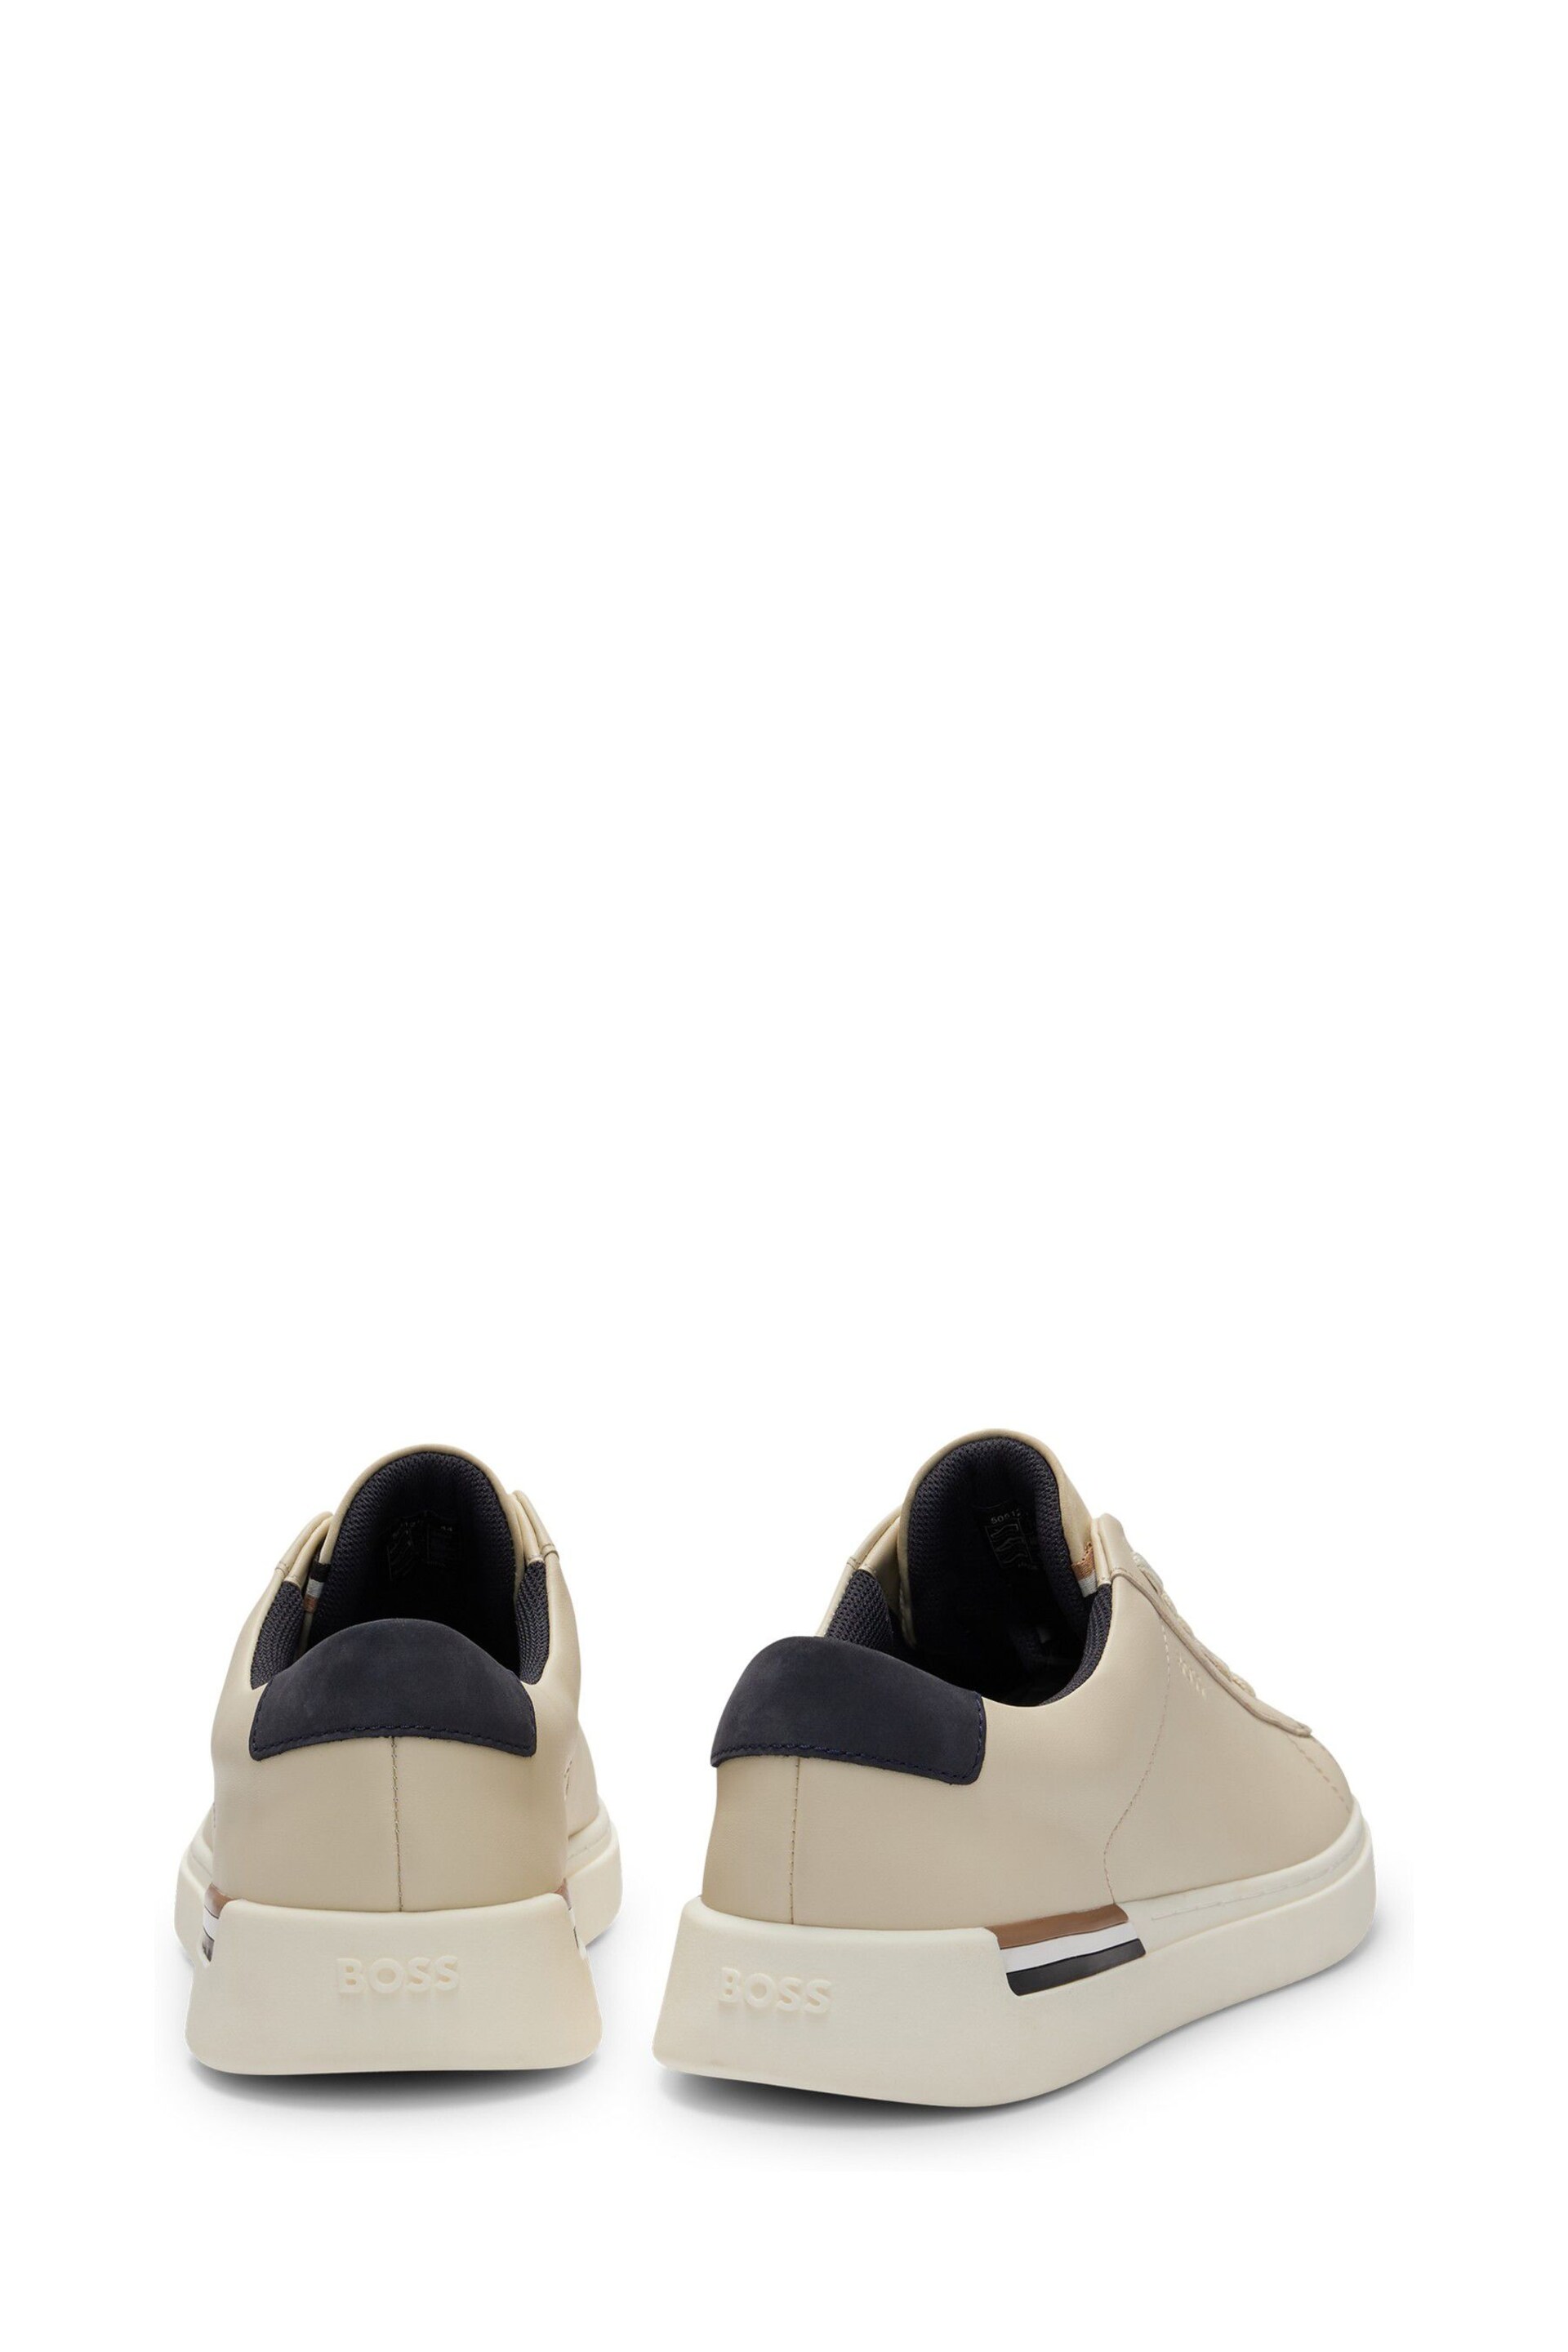 BOSS Cream Clint Cupsole Lace Up Leather Trainers - Image 3 of 5